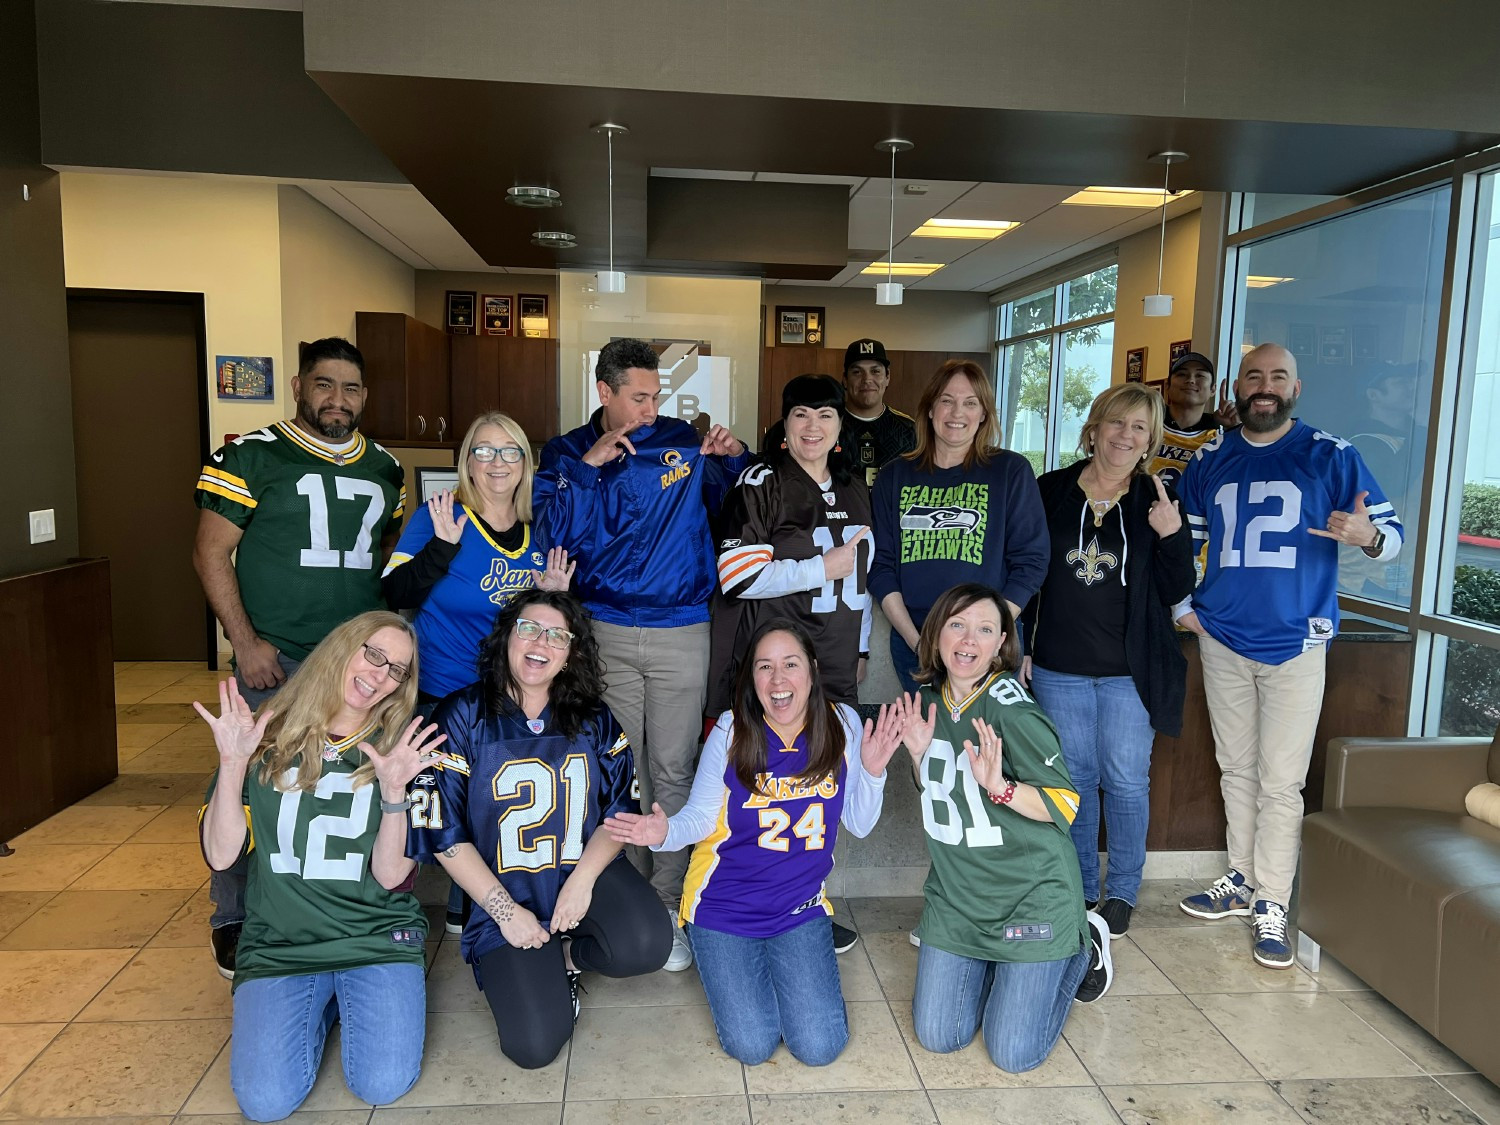 The office sports their Sporting colors to celebrate Football season.